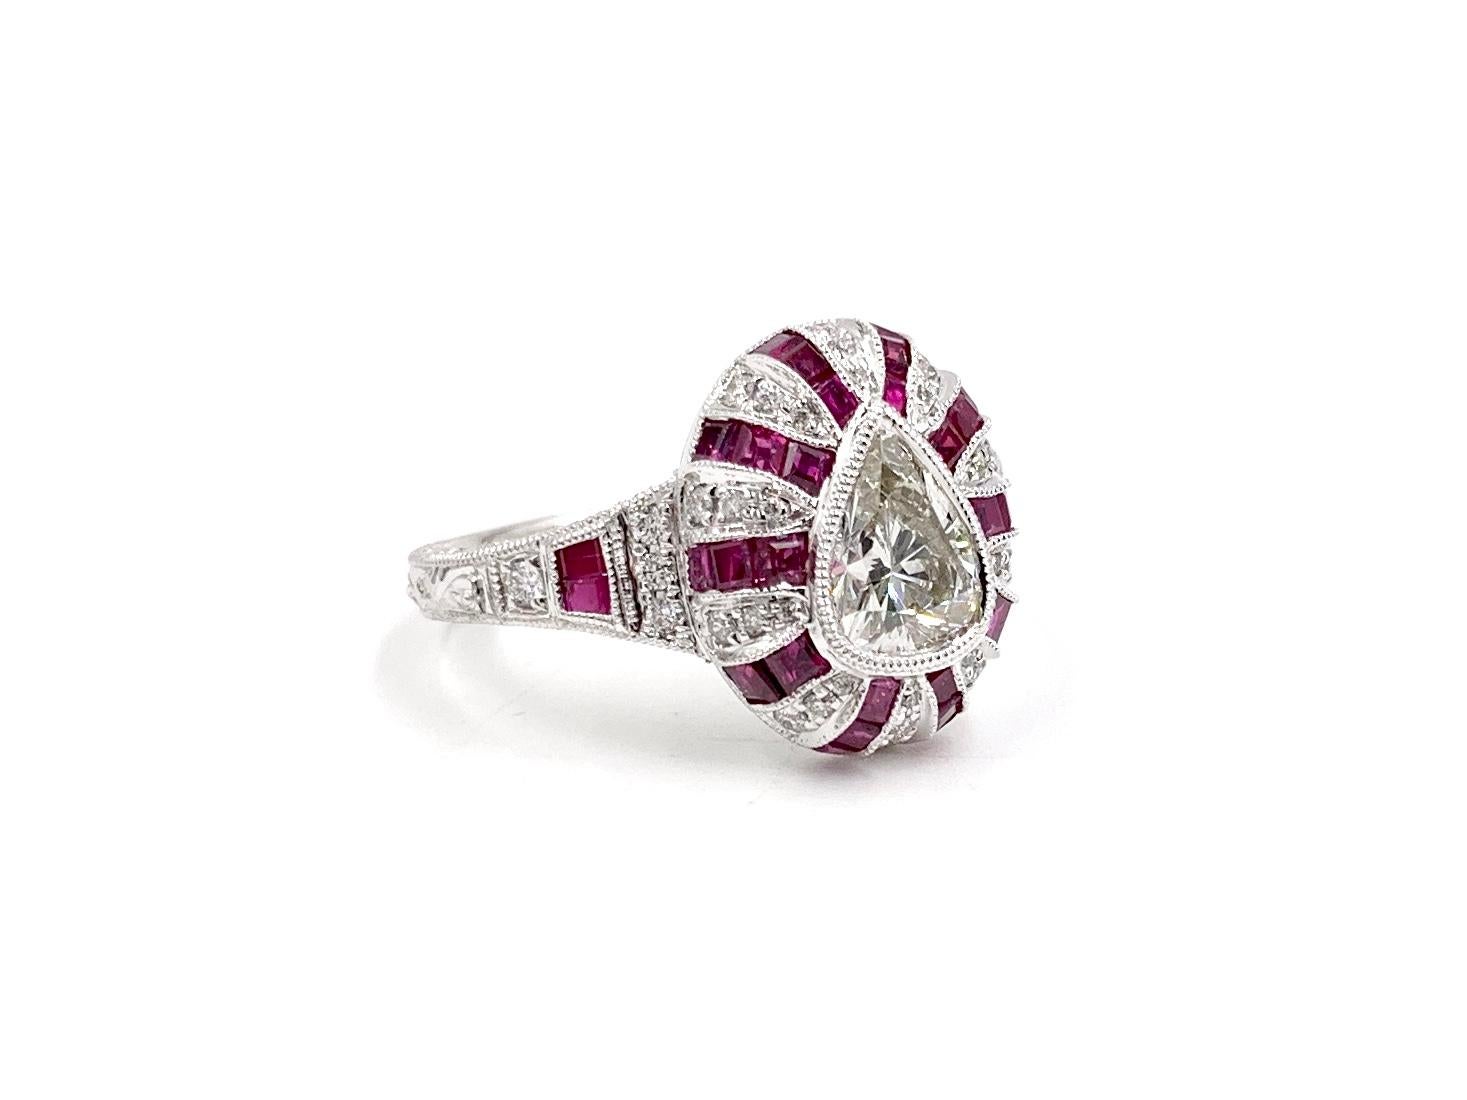 A gorgeous Art Deco inspired 14 karat white gold ring featuring a .87 carat center pear shape diamond with quality of approximately H color, VS2 clarity perfectly bezel set. Diamond is surrounded by alternating rows of princess cut rubies at 1.30